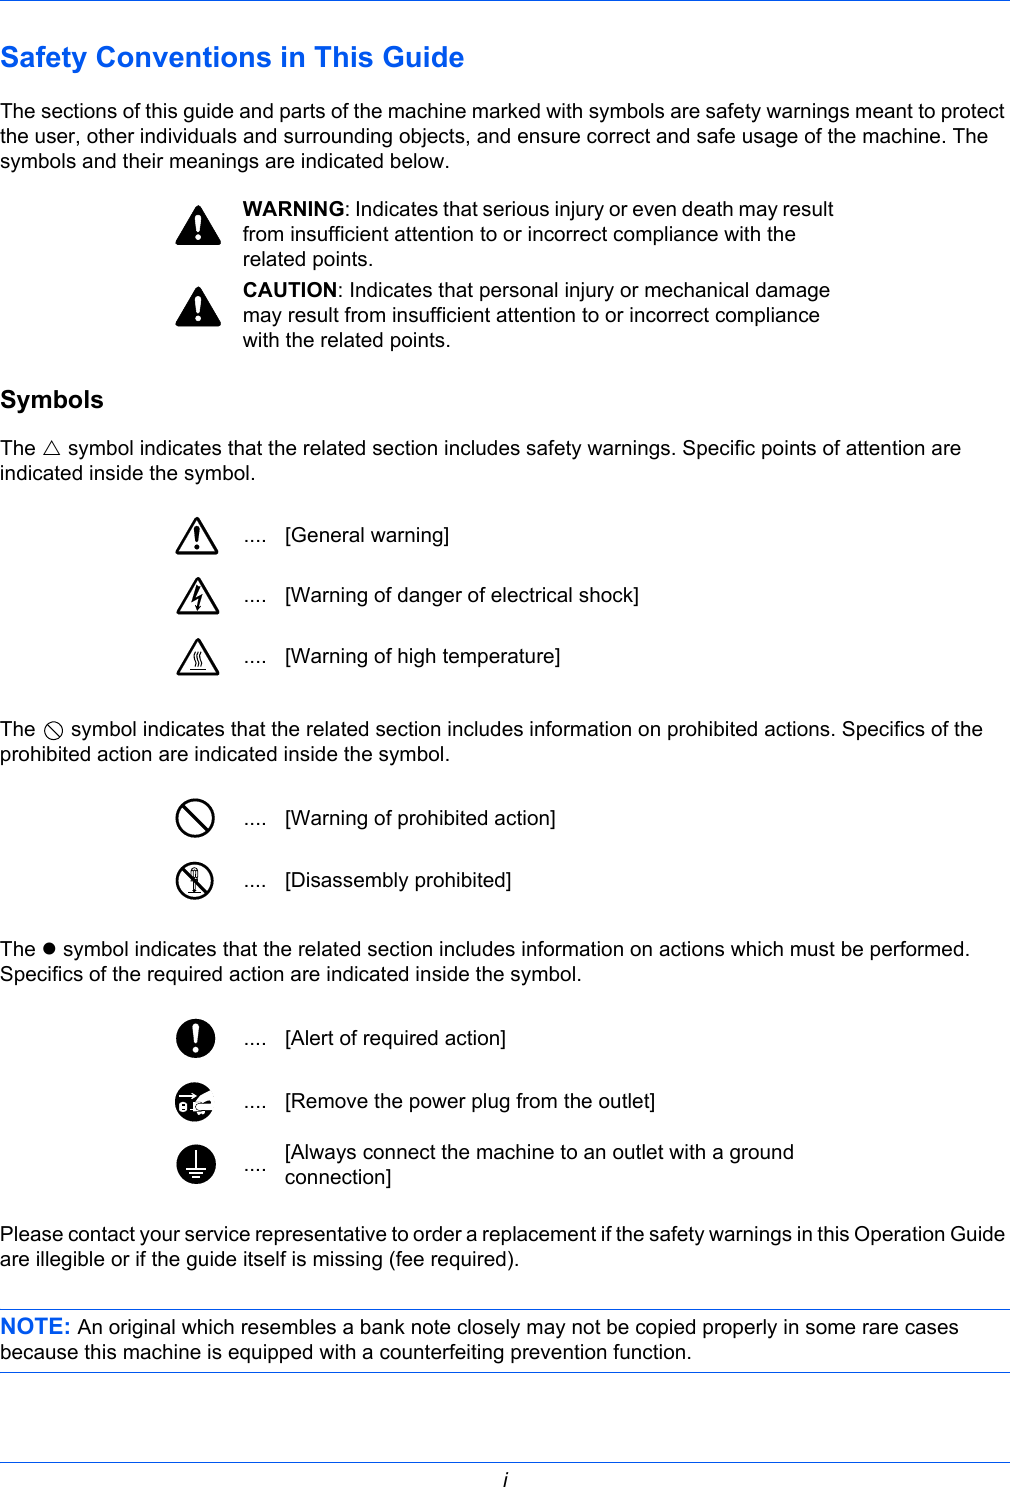  iSafety Conventions in This GuideThe sections of this guide and parts of the machine marked with symbols are safety warnings meant to protect the user, other individuals and surrounding objects, and ensure correct and safe usage of the machine. The symbols and their meanings are indicated below.SymbolsThe U symbol indicates that the related section includes safety warnings. Specific points of attention are indicated inside the symbol.The   symbol indicates that the related section includes information on prohibited actions. Specifics of the prohibited action are indicated inside the symbol.The z symbol indicates that the related section includes information on actions which must be performed. Specifics of the required action are indicated inside the symbol.Please contact your service representative to order a replacement if the safety warnings in this Operation Guide are illegible or if the guide itself is missing (fee required).NOTE: An original which resembles a bank note closely may not be copied properly in some rare cases because this machine is equipped with a counterfeiting prevention function.WARNING: Indicates that serious injury or even death may result from insufficient attention to or incorrect compliance with the related points.CAUTION: Indicates that personal injury or mechanical damage may result from insufficient attention to or incorrect compliance with the related points..... [General warning].... [Warning of danger of electrical shock].... [Warning of high temperature].... [Warning of prohibited action].... [Disassembly prohibited].... [Alert of required action].... [Remove the power plug from the outlet].... [Always connect the machine to an outlet with a ground connection]